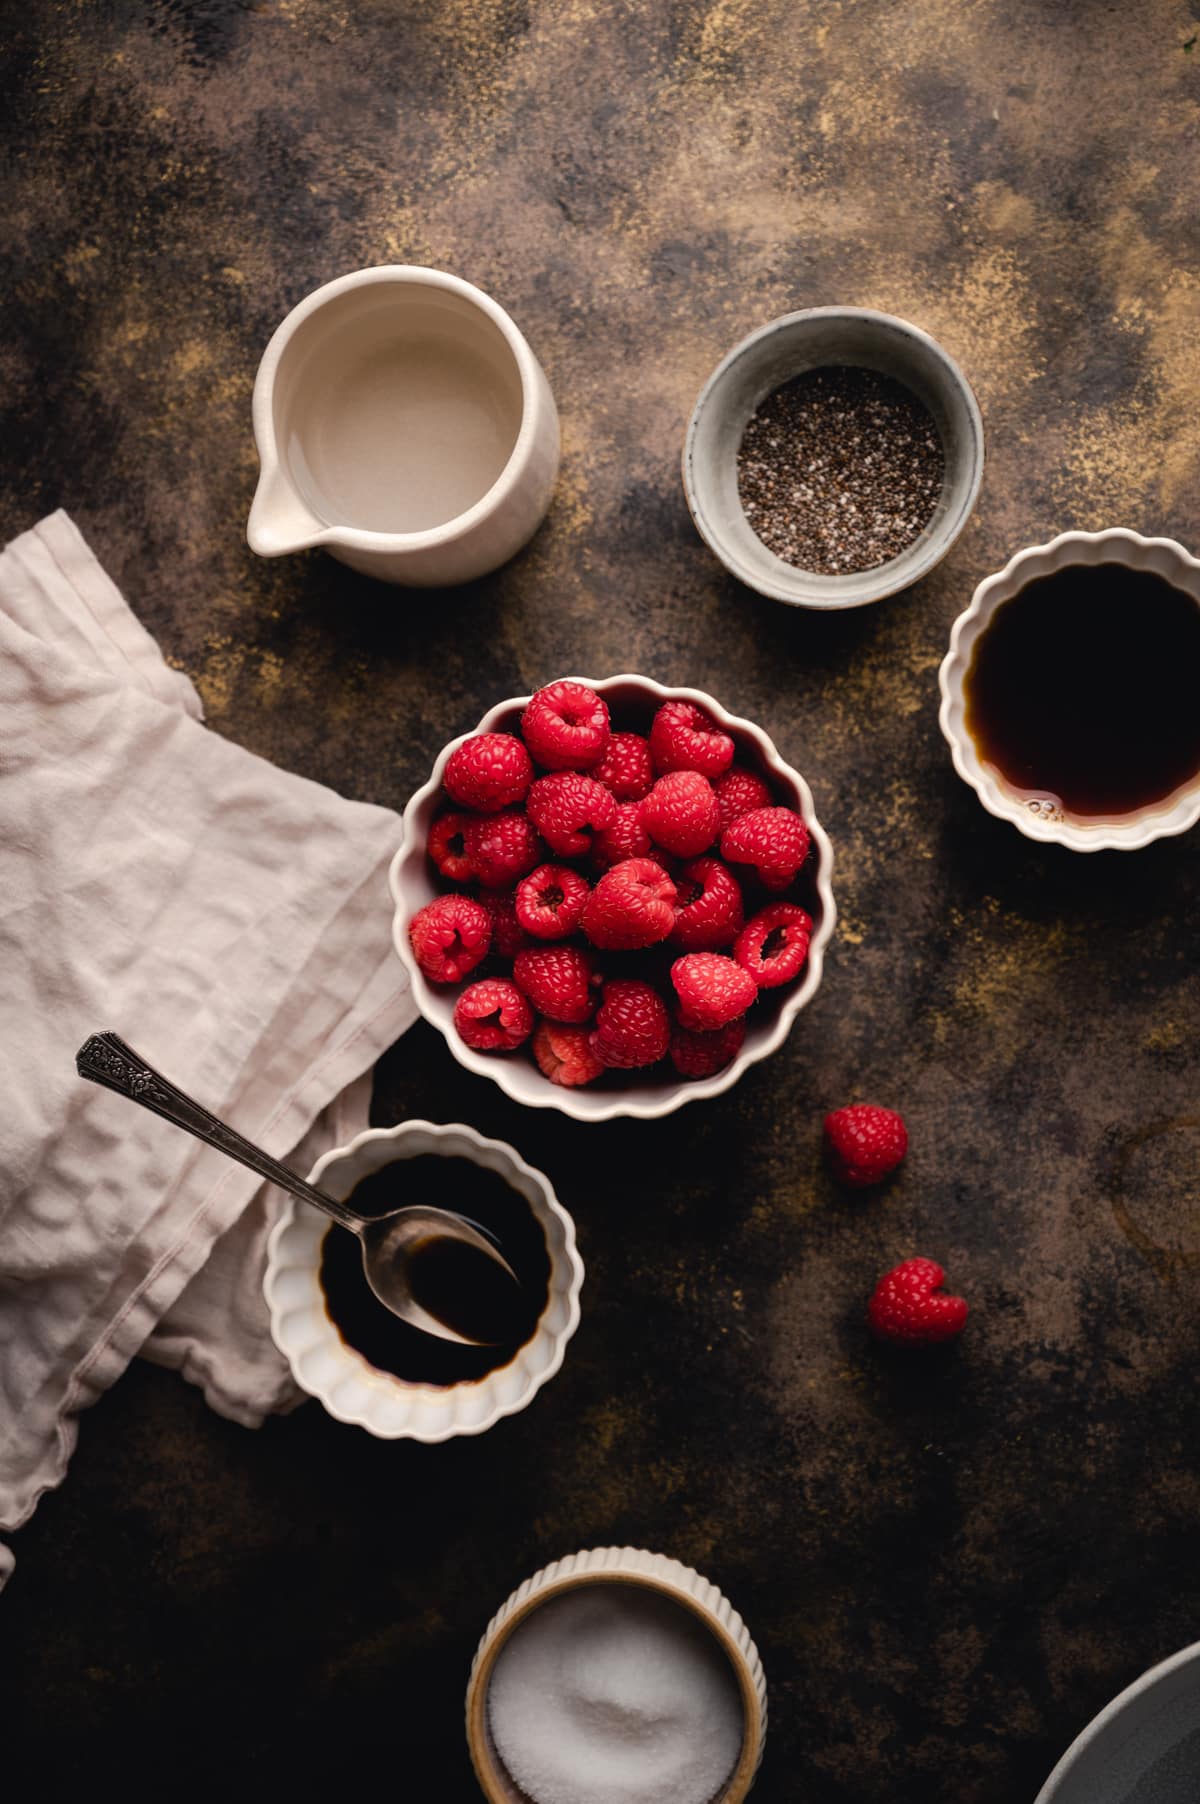 Bowls of ingredients including chia seeds, raspberries, maple syrup, and more.